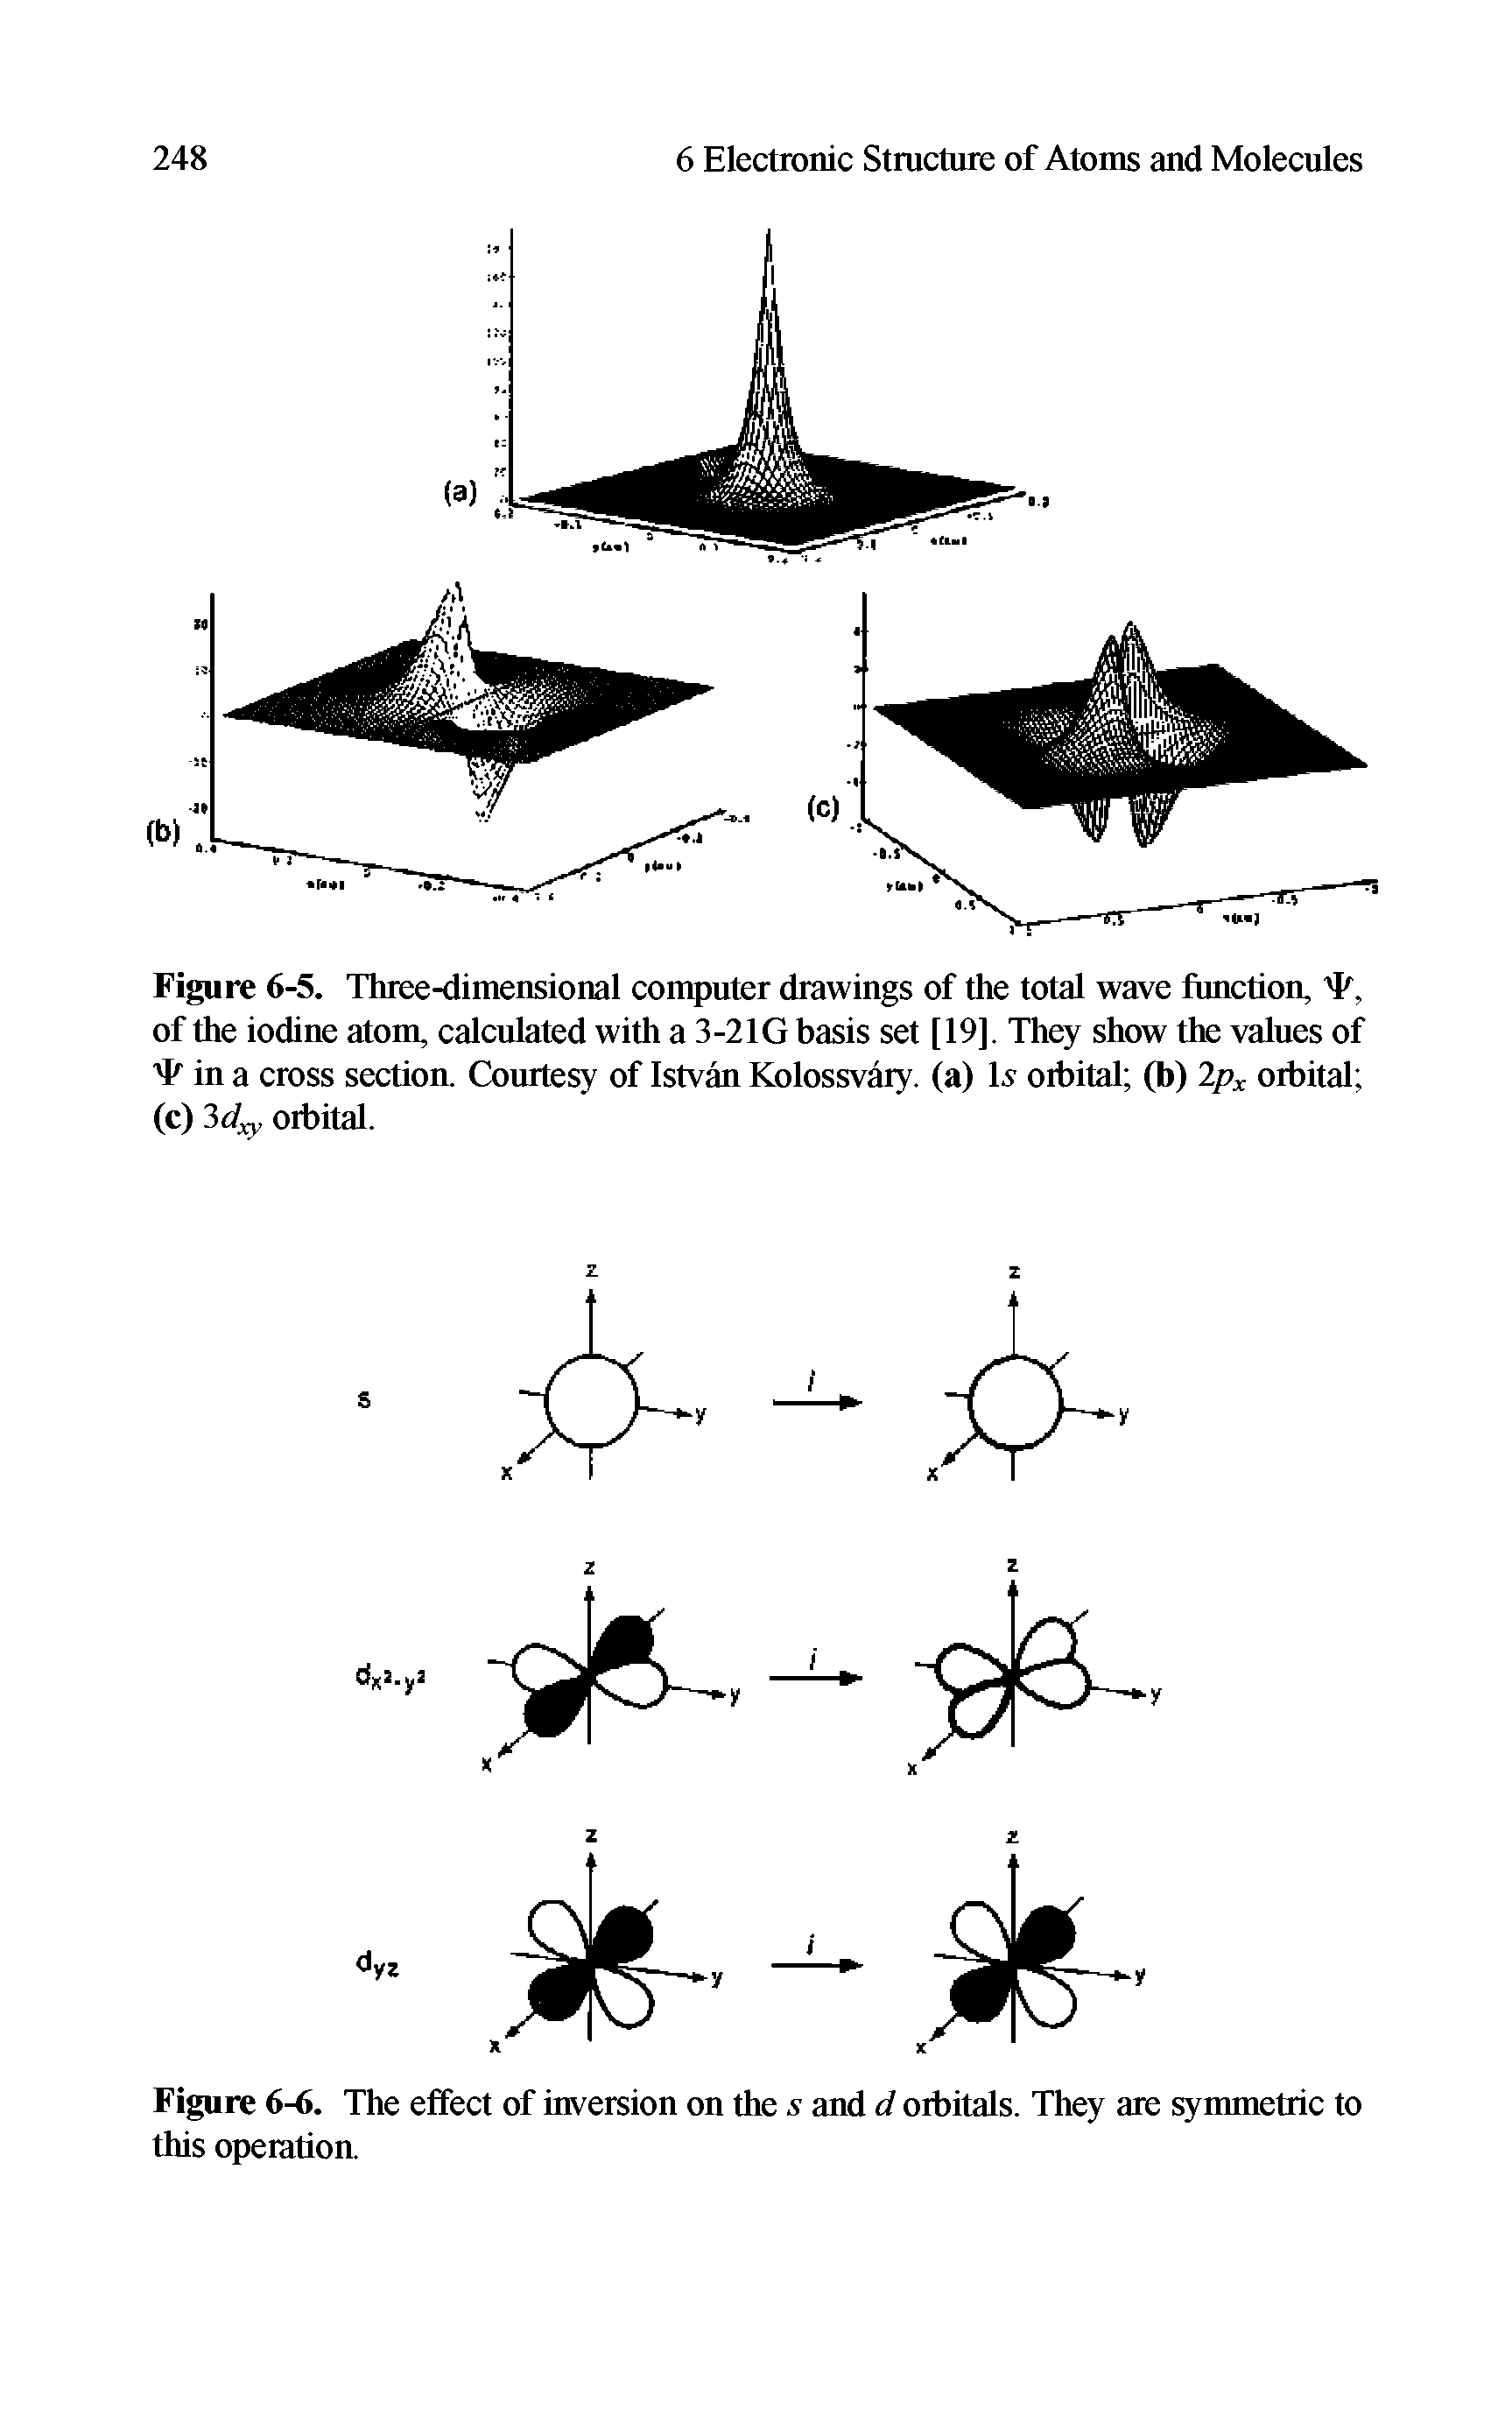 Figure 6-5. Three-dimensional computer drawings of the total wave function, 4/, of the iodine atom, calculated with a 3-21G basis set [19], They show the values of P in a cross section. Courtesy of Istvan Kolossvary. (a) Is- orbital (b) 2px orbital (c) 3dxy orbital.